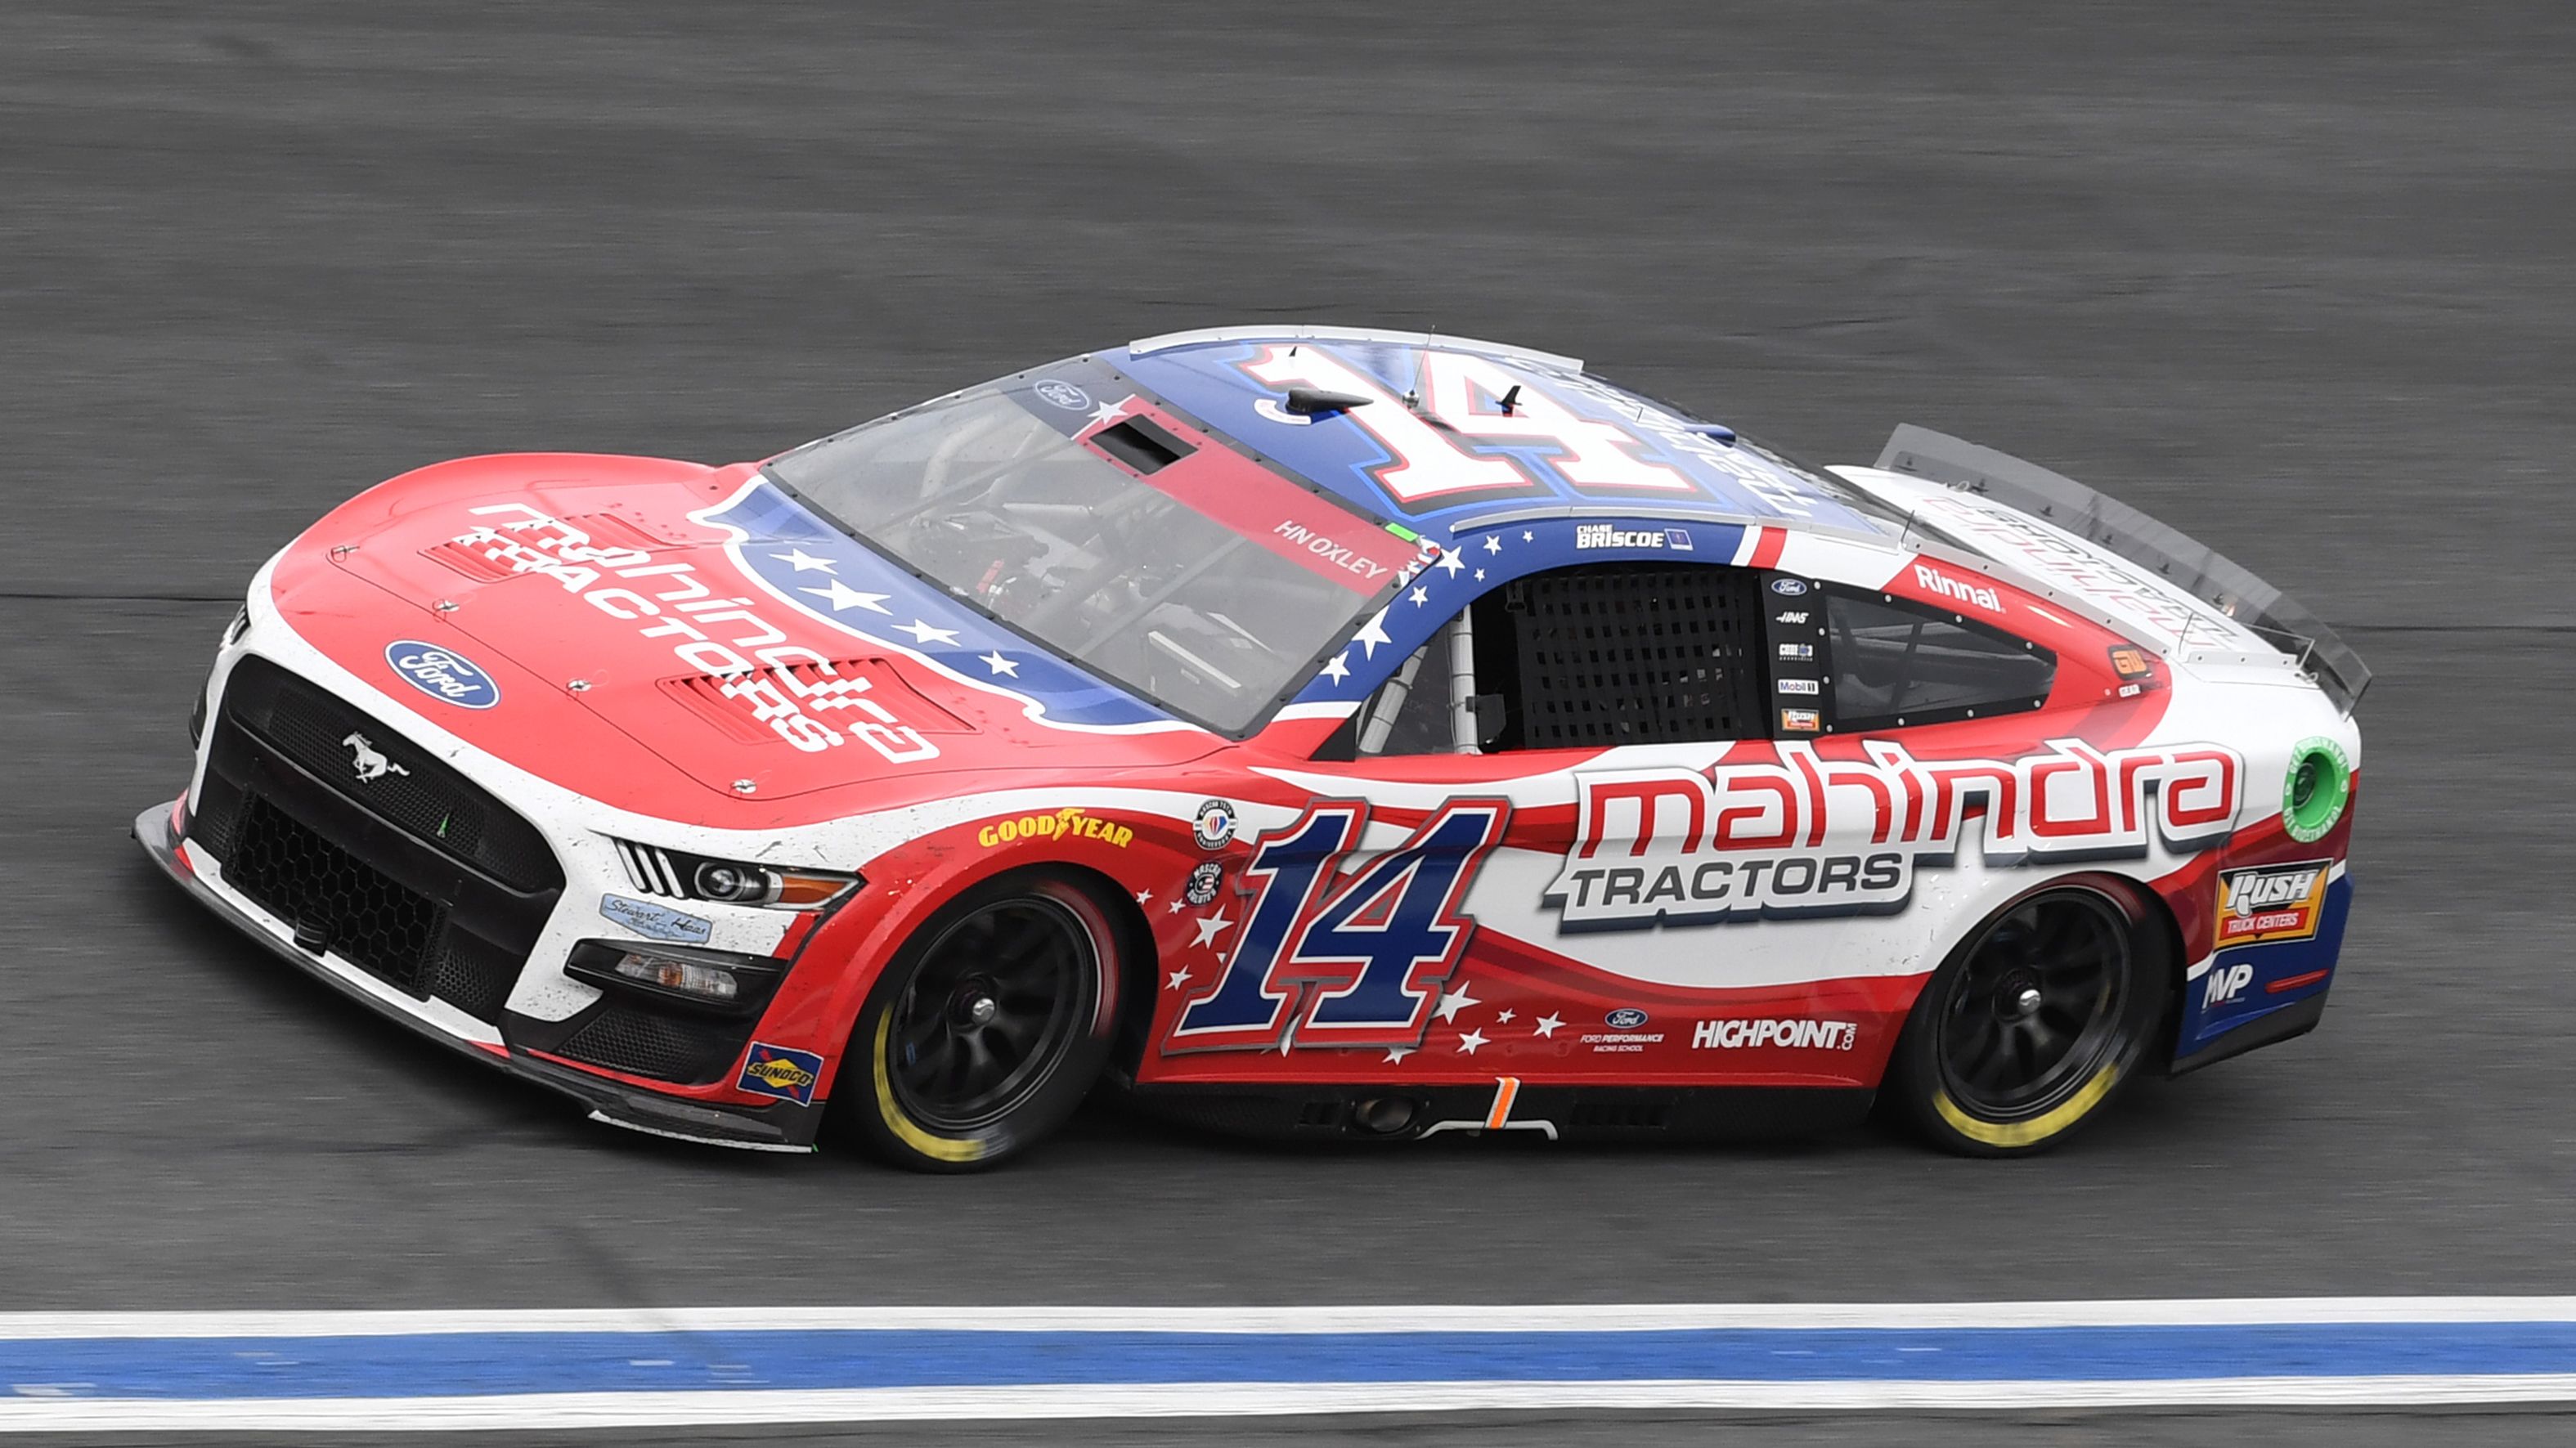 Chase Briscoe drives the No.14 Stewart Haas Racing Ford Mustang.